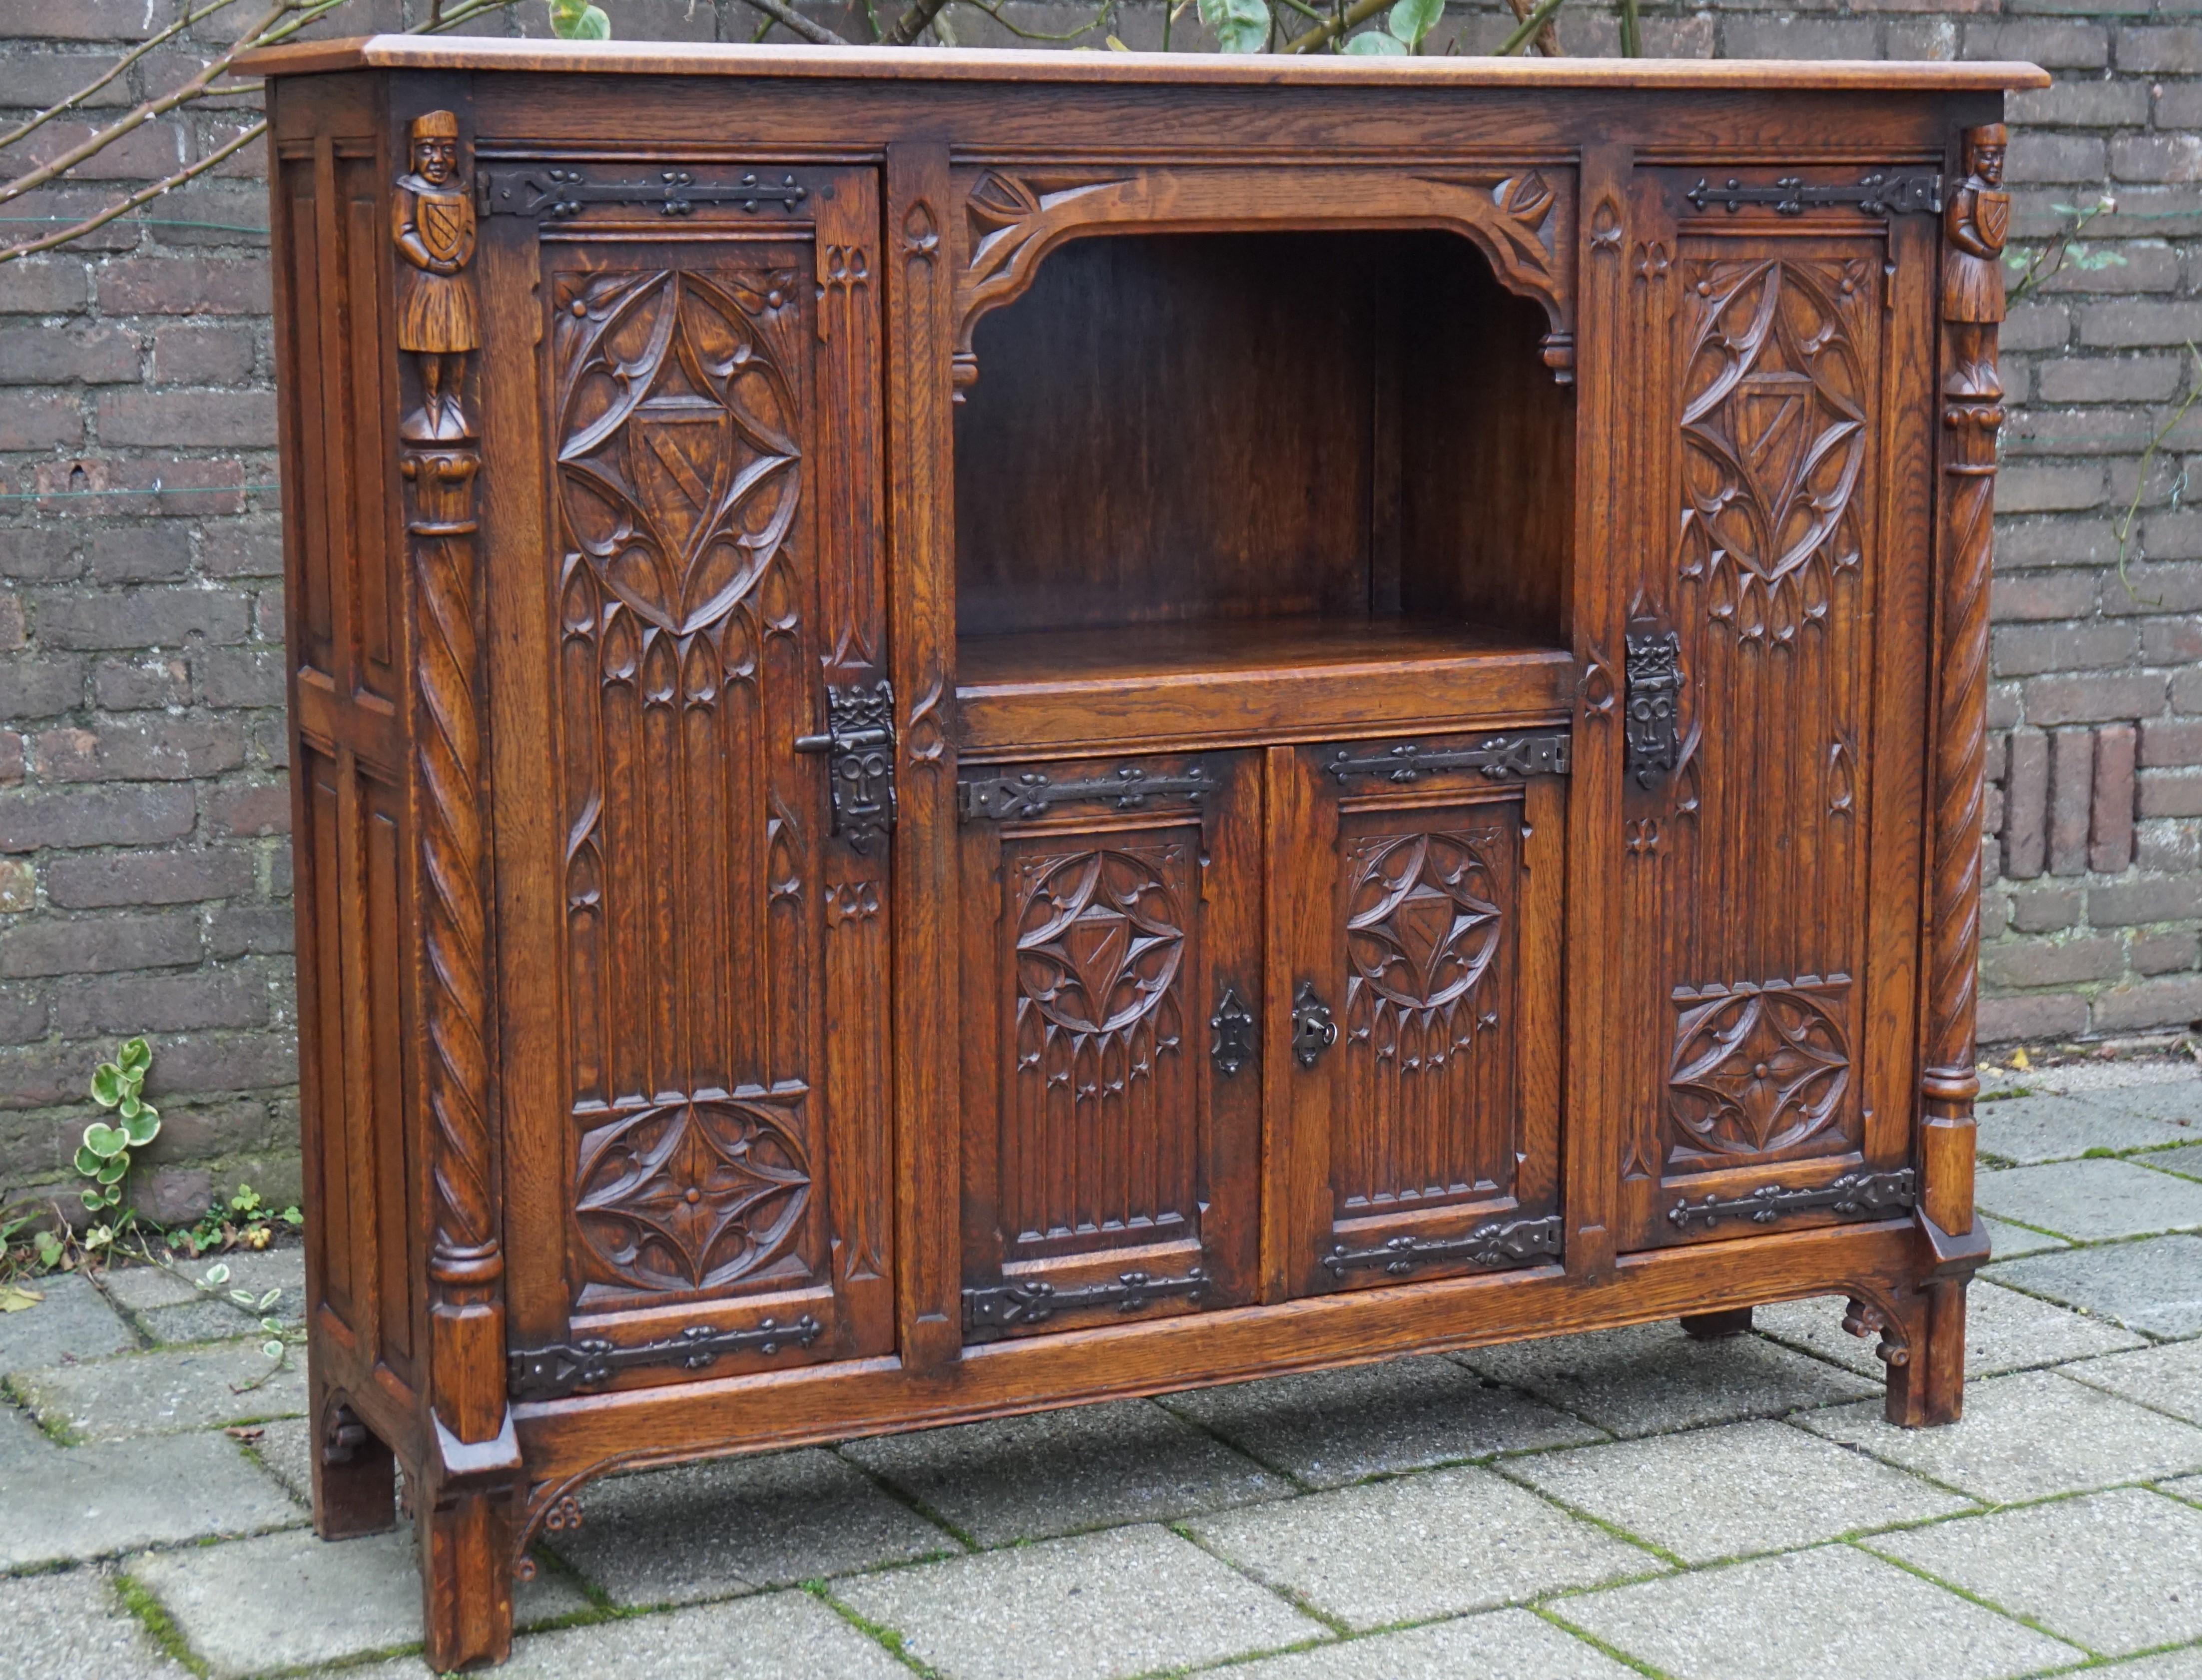 Dutch Stunning Antique Gothic Revival Hand Carved Bookcase / Sideboard /Drinks Cabinet